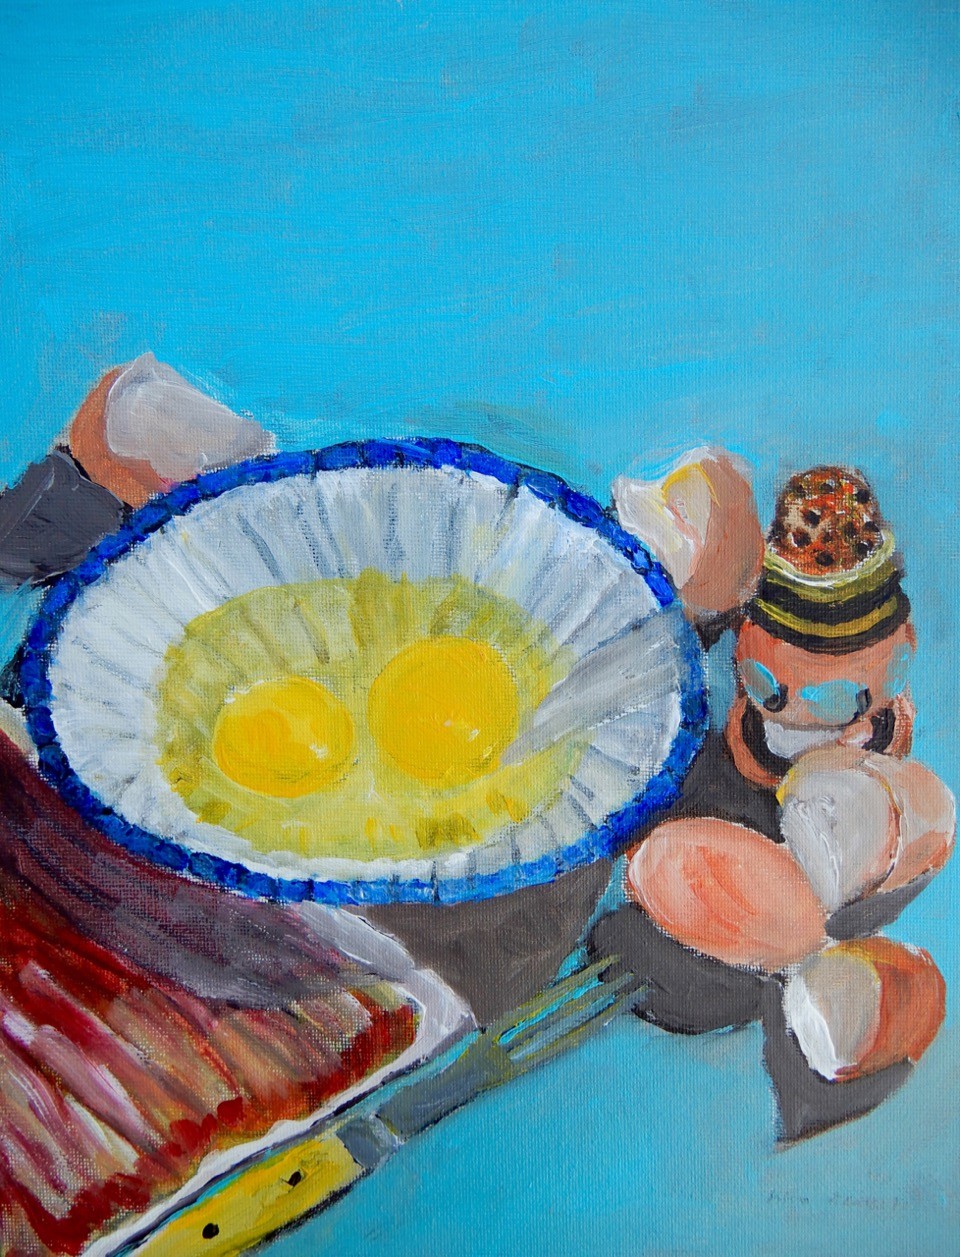 a painting by John Butts, Jr. called “Over Easy”. It is kind of a still-life of a breakfast scene, and features a white and blue bowl with two cracked raw eggs, egg shells outside the bowl, a fork, a saltshaker and a slab of raw bacon. All of these items are set against a light blue background.